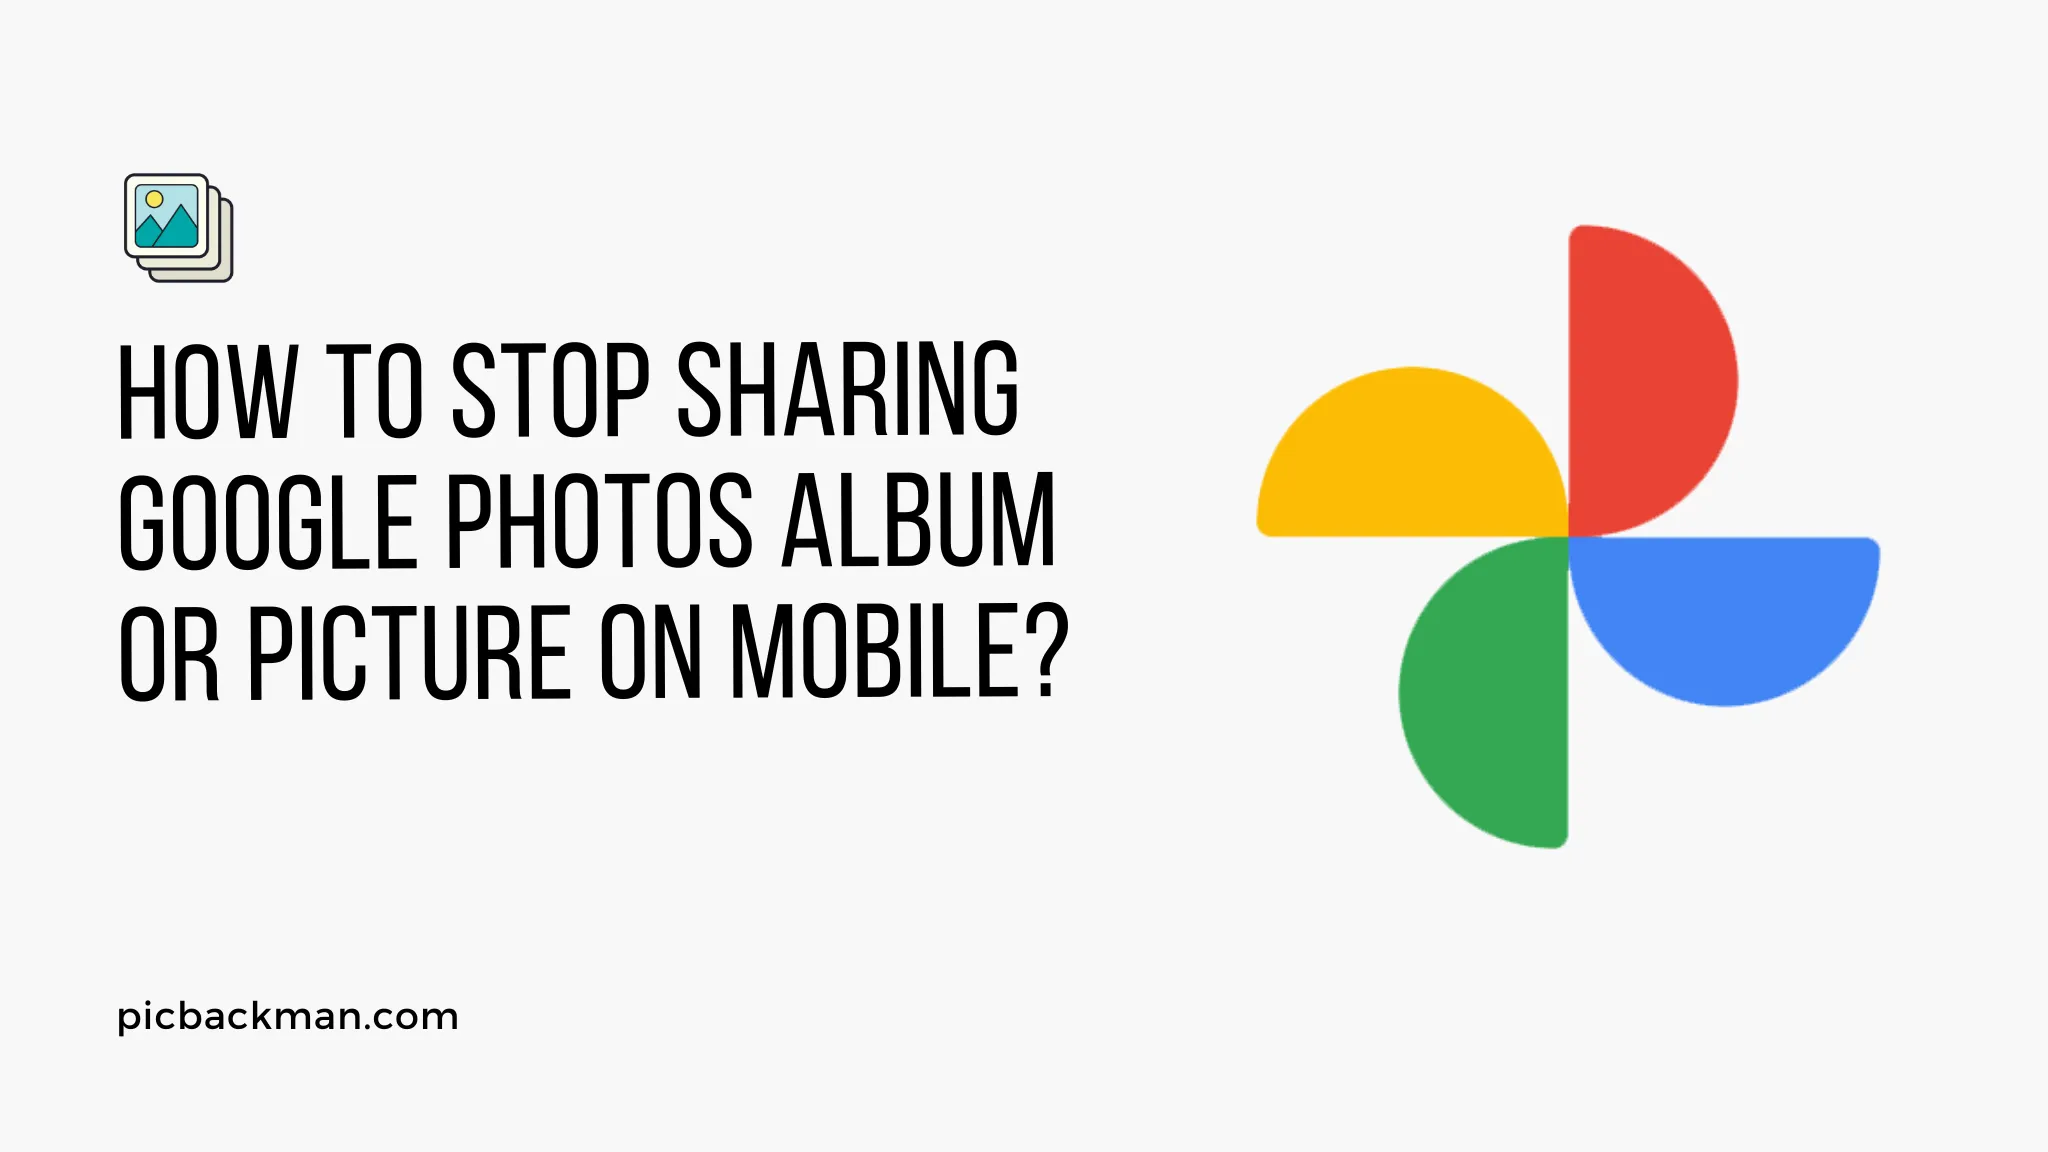 How to Stop Sharing Google Photos album or Picture on Mobile?